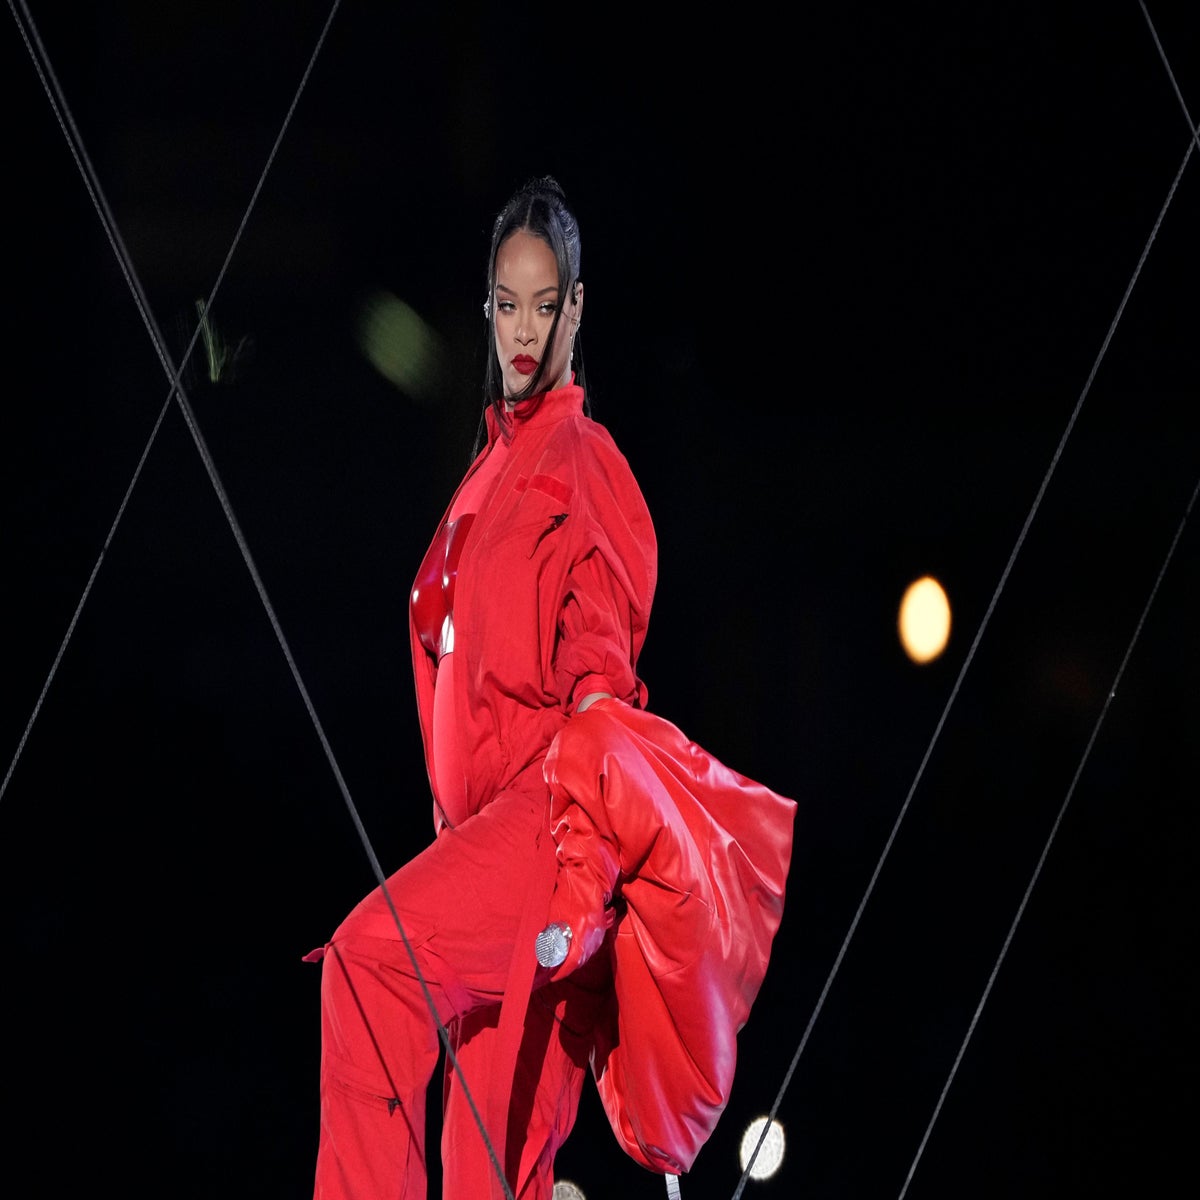 Super Bowl halftime show performer fashion and style - photos